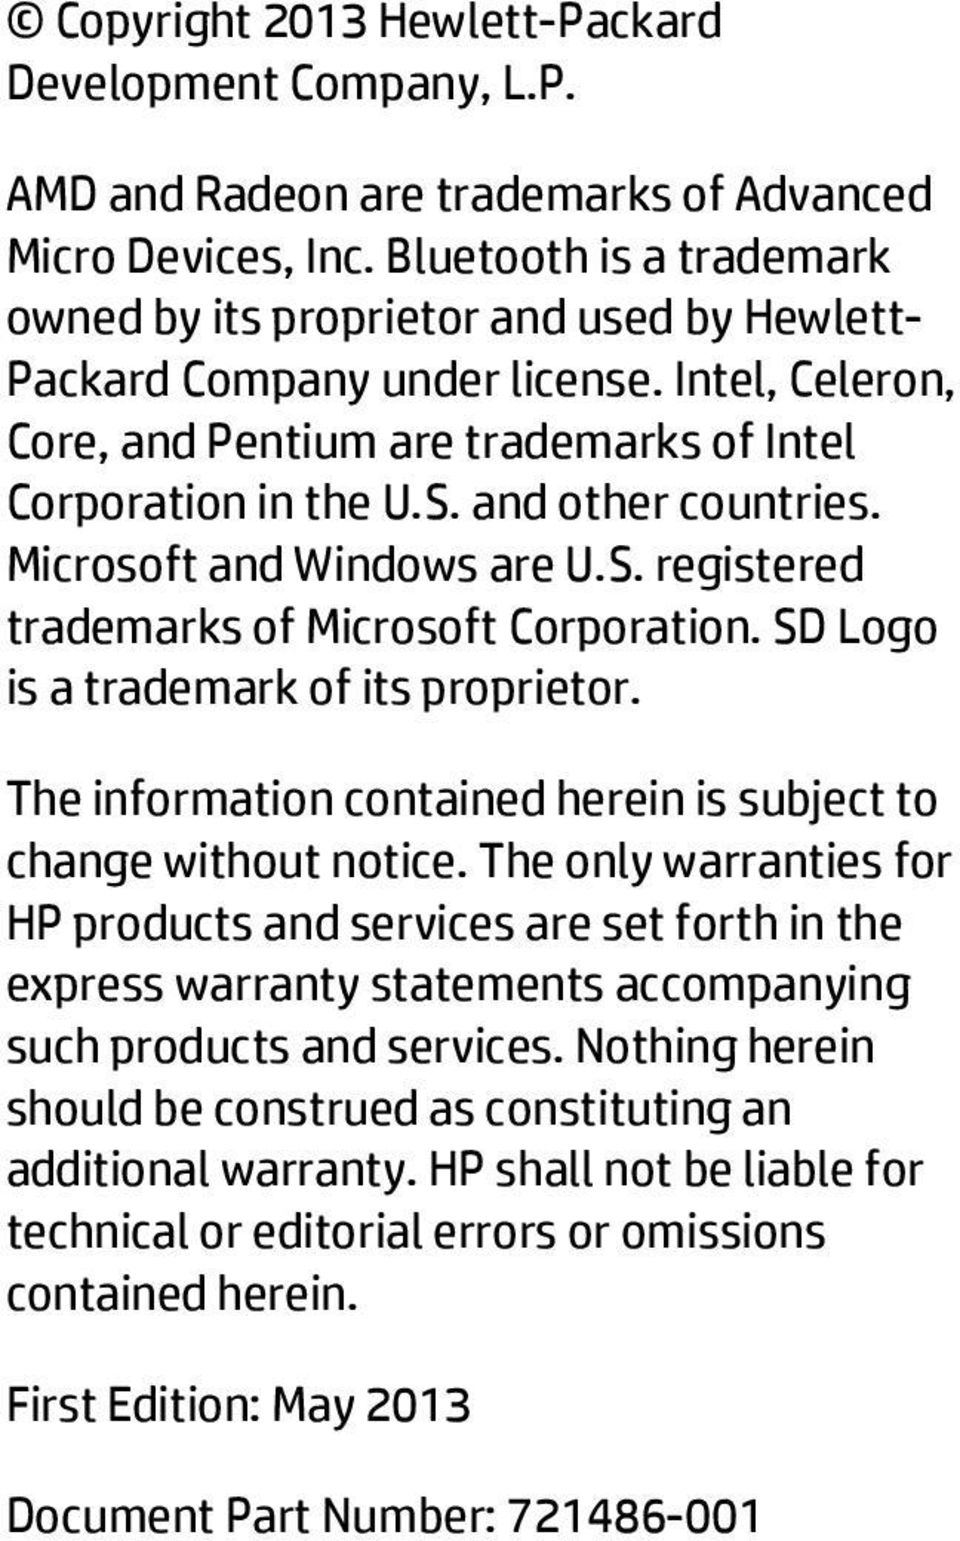 and other countries. Microsoft and Windows are U.S. registered trademarks of Microsoft Corporation. SD Logo is a trademark of its proprietor.